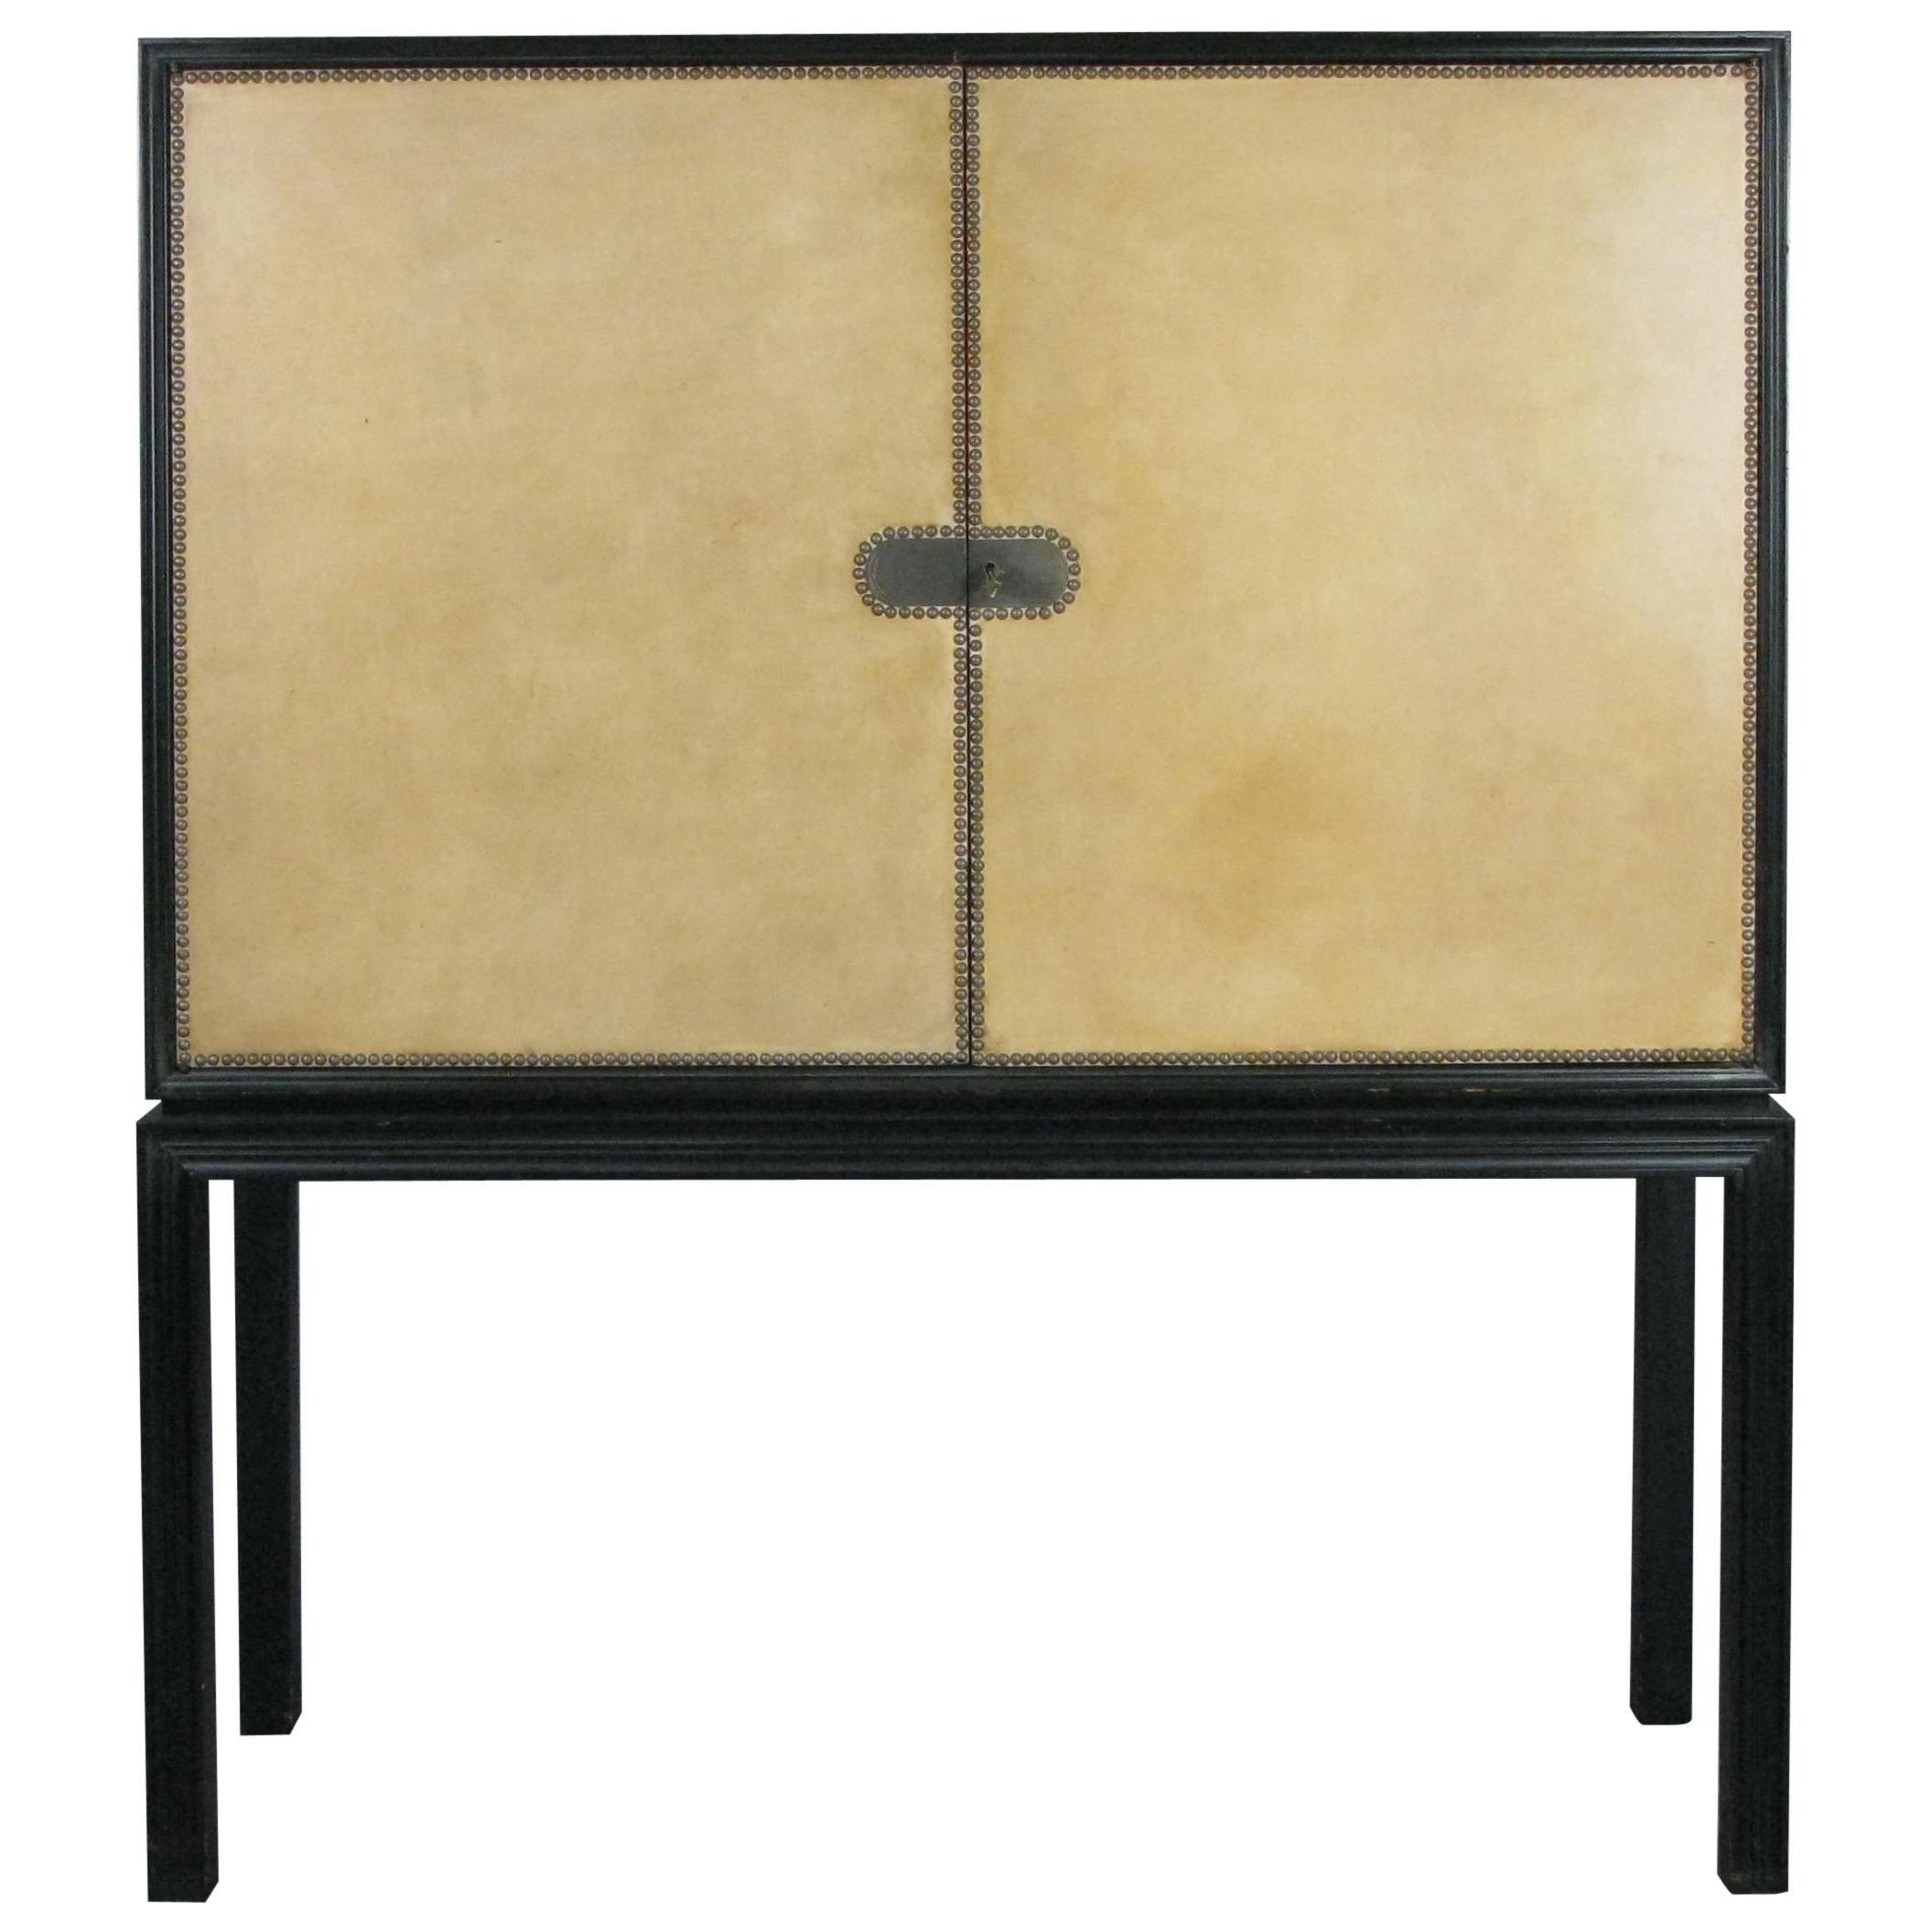 A very elegant and handsome late 1940s lacquered mahogany cabinet designed by Tommi Parzinger for Charak Modern. Raised on tall legs with molded detail, the doors have cream colored leather with nailhead trim detail. The center with bronze plaques